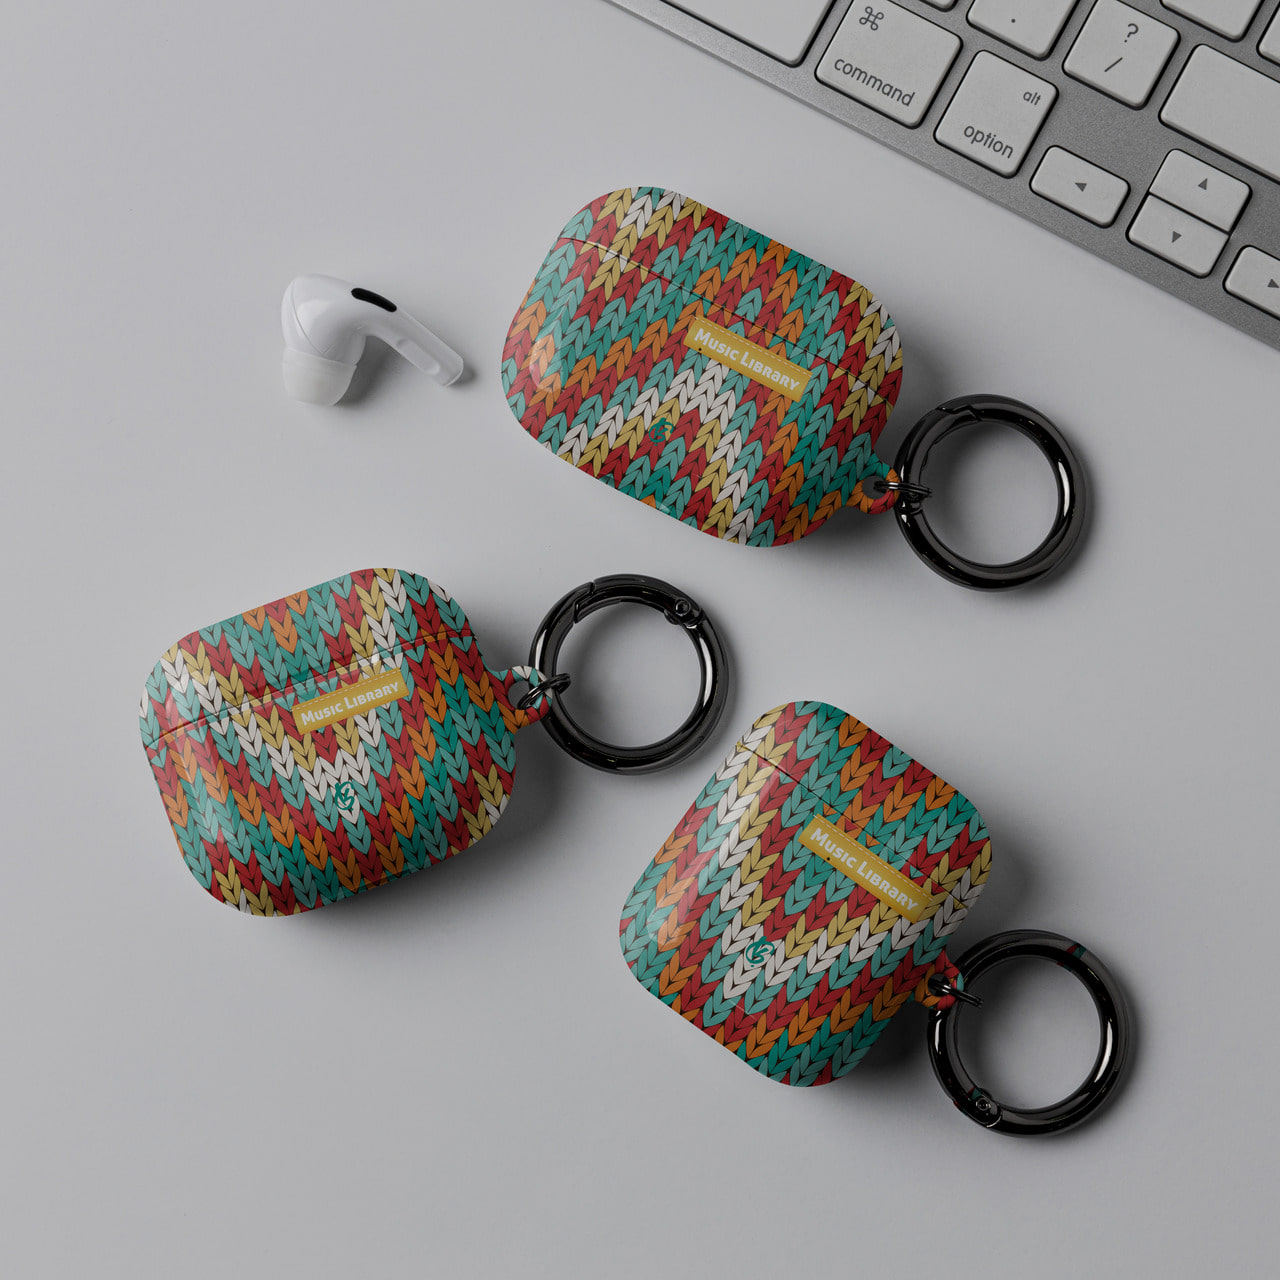 [Airpods cases] FRAT No.12